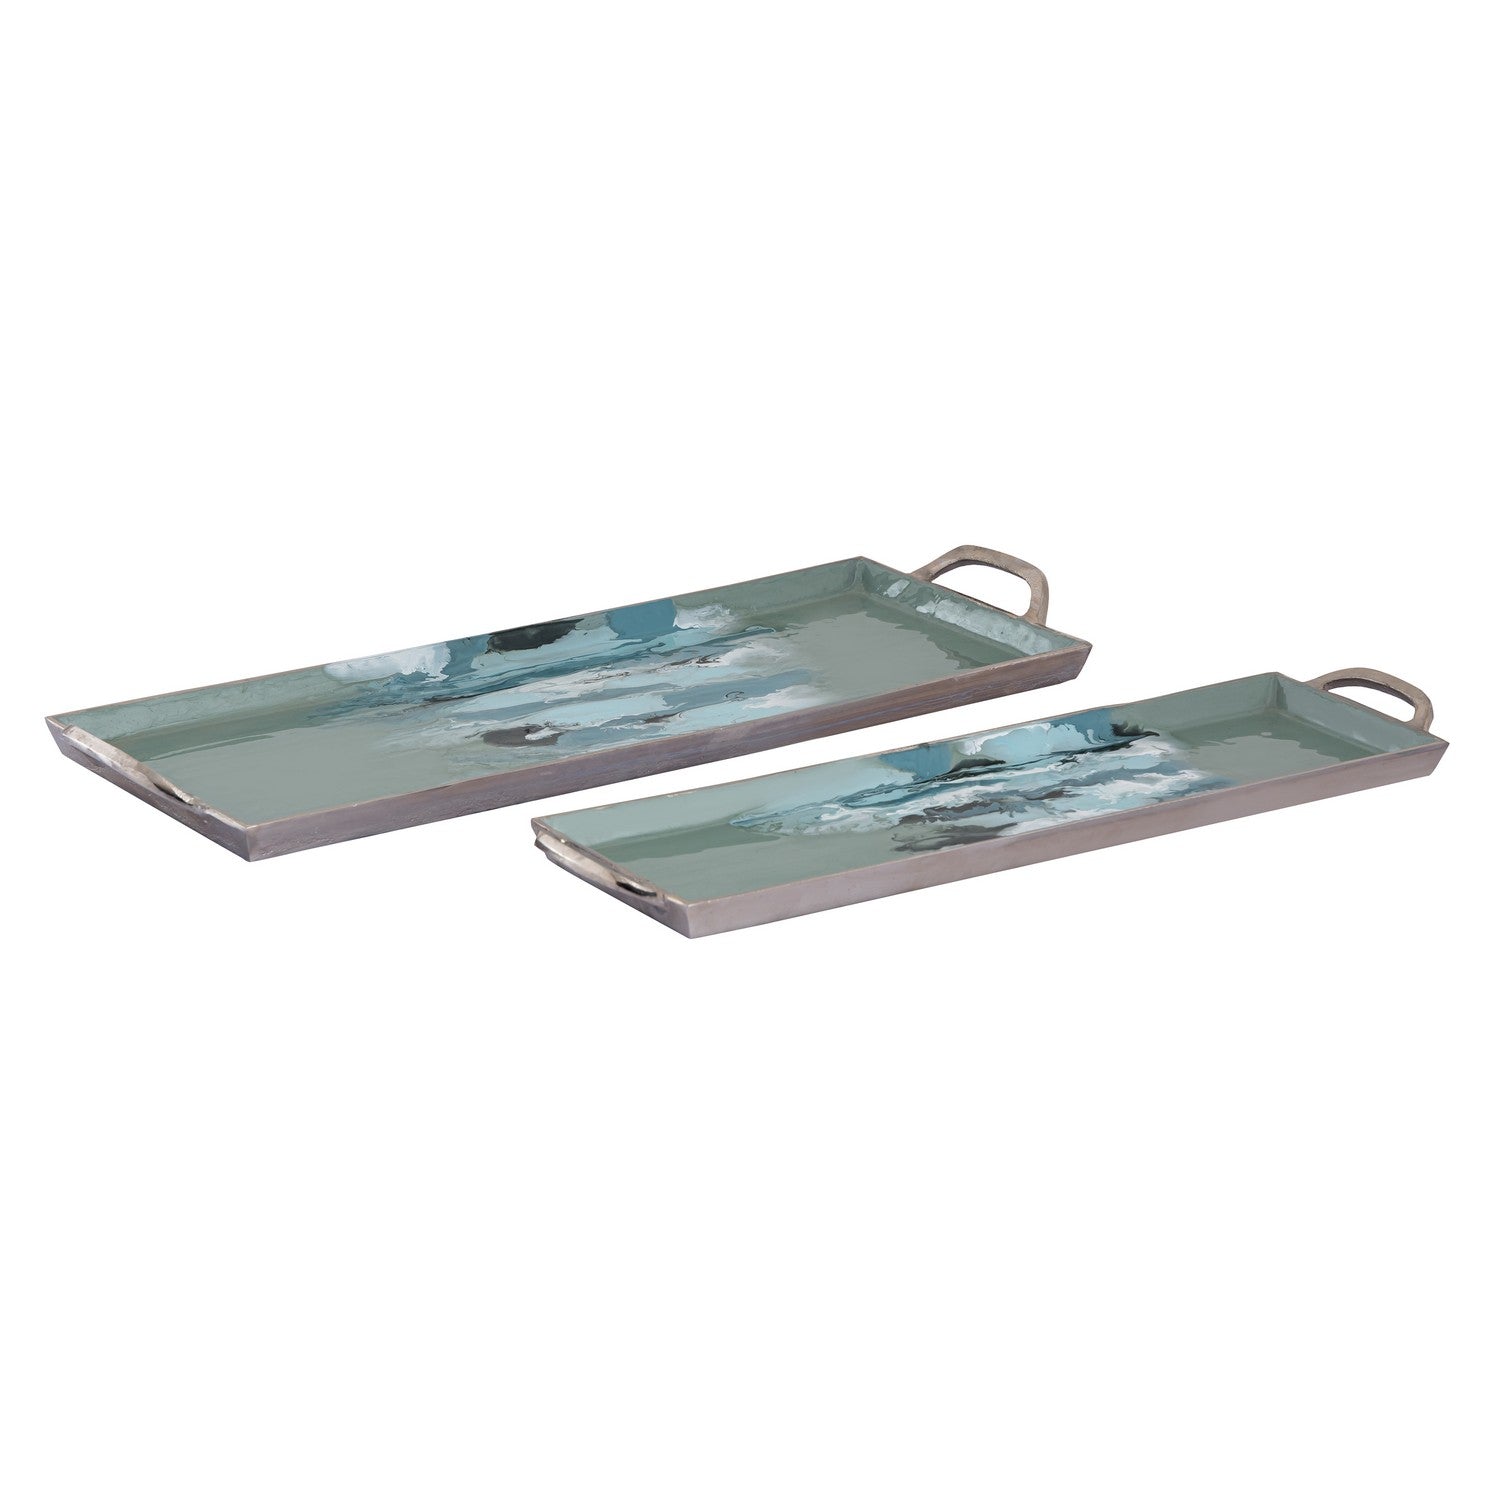 ELK Home - S0807-11355/S2 - Tray - Set of 2 - Spindrift - Green